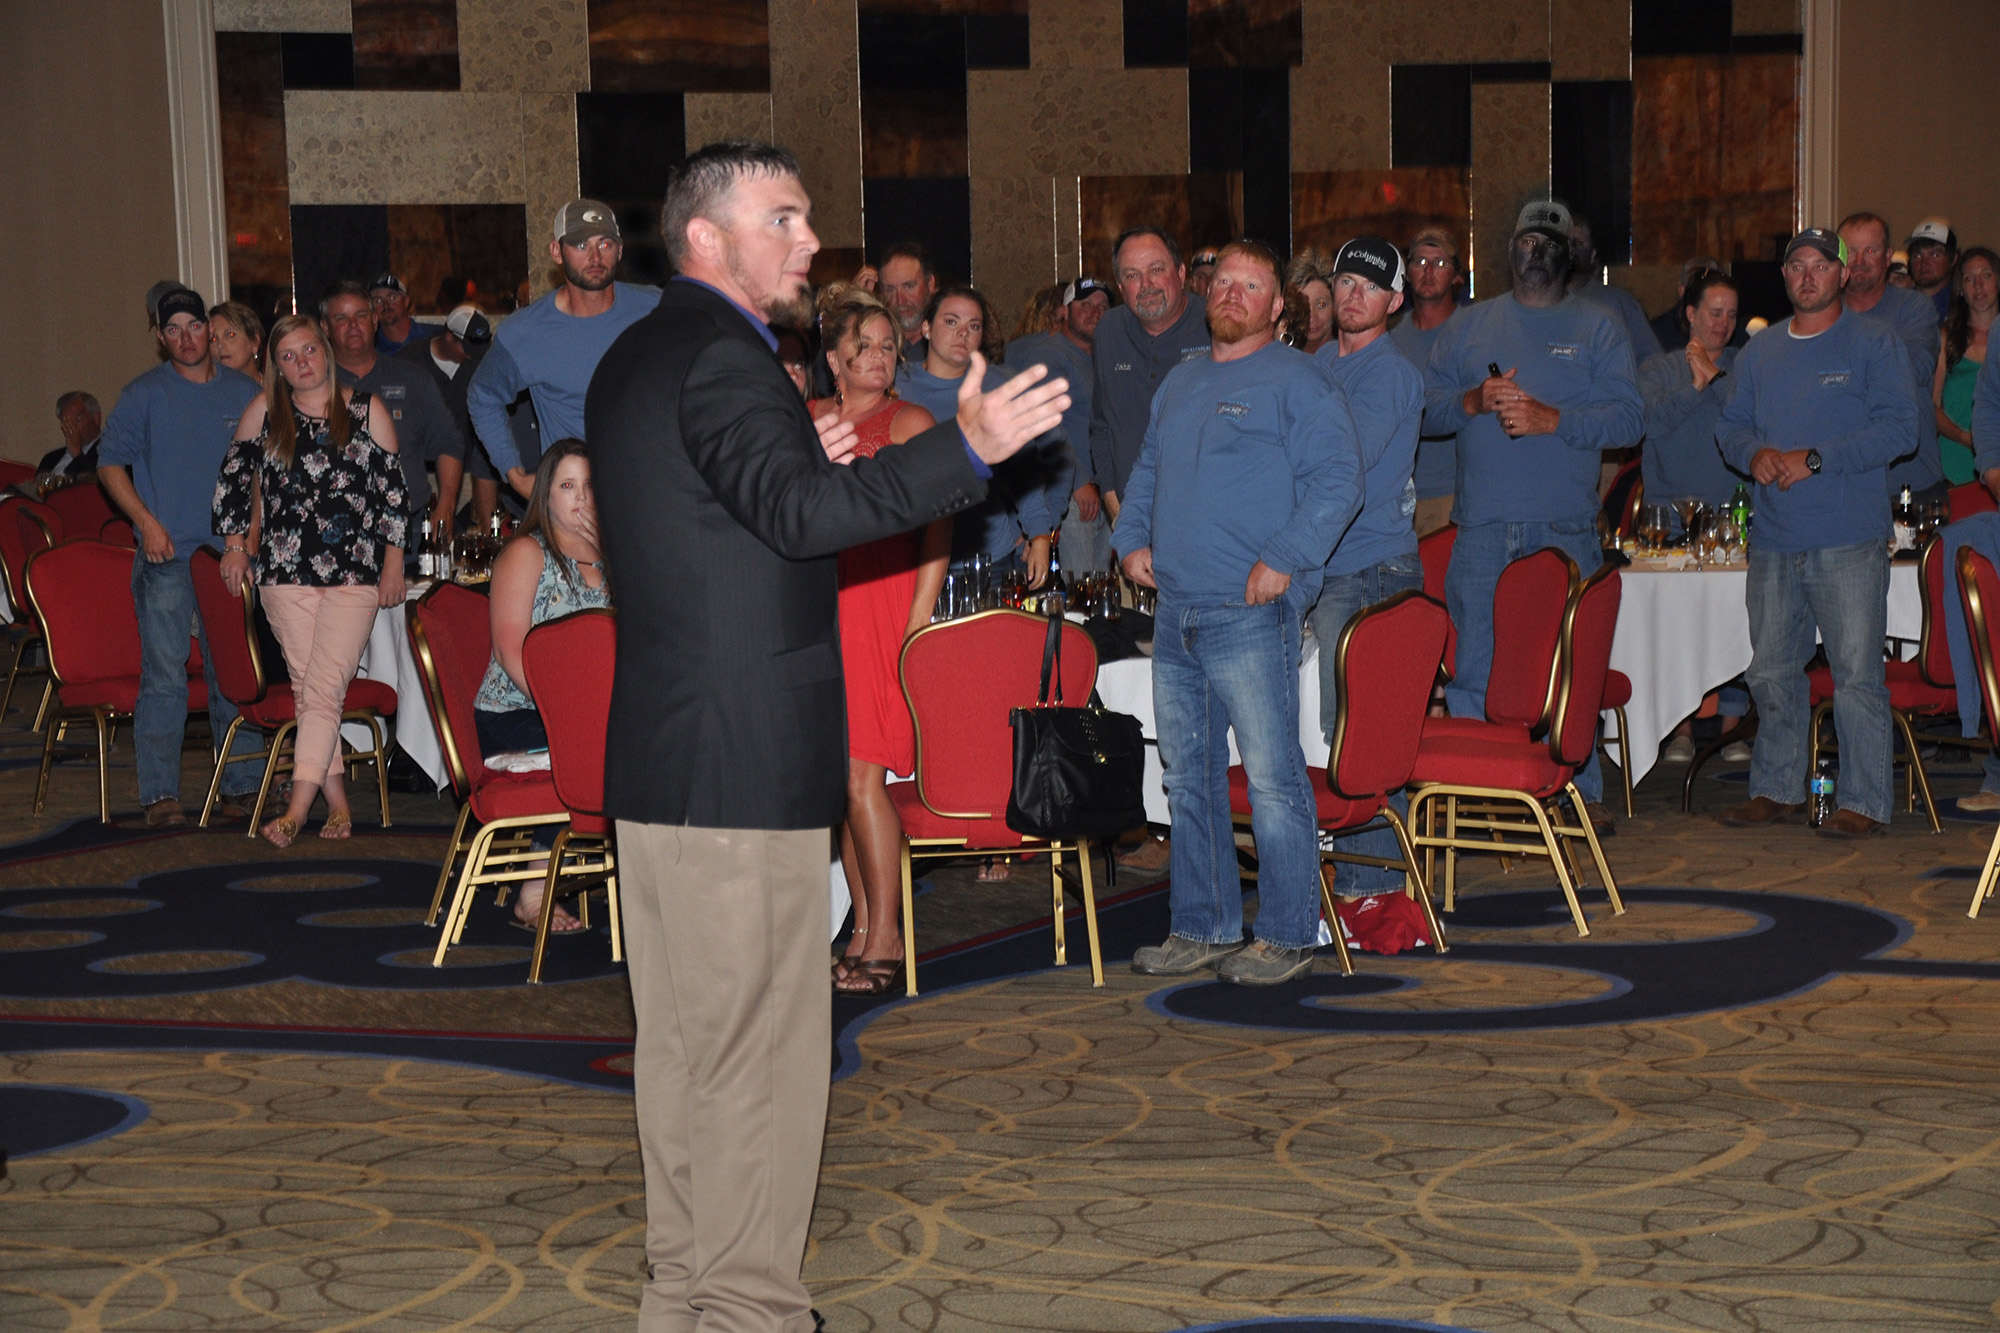 Fellow linemen stand during Nate Humphrey's presentation at the Gaff-n-Go Rodeo. (Photo By: Bill Sherrod/VMDAEC)